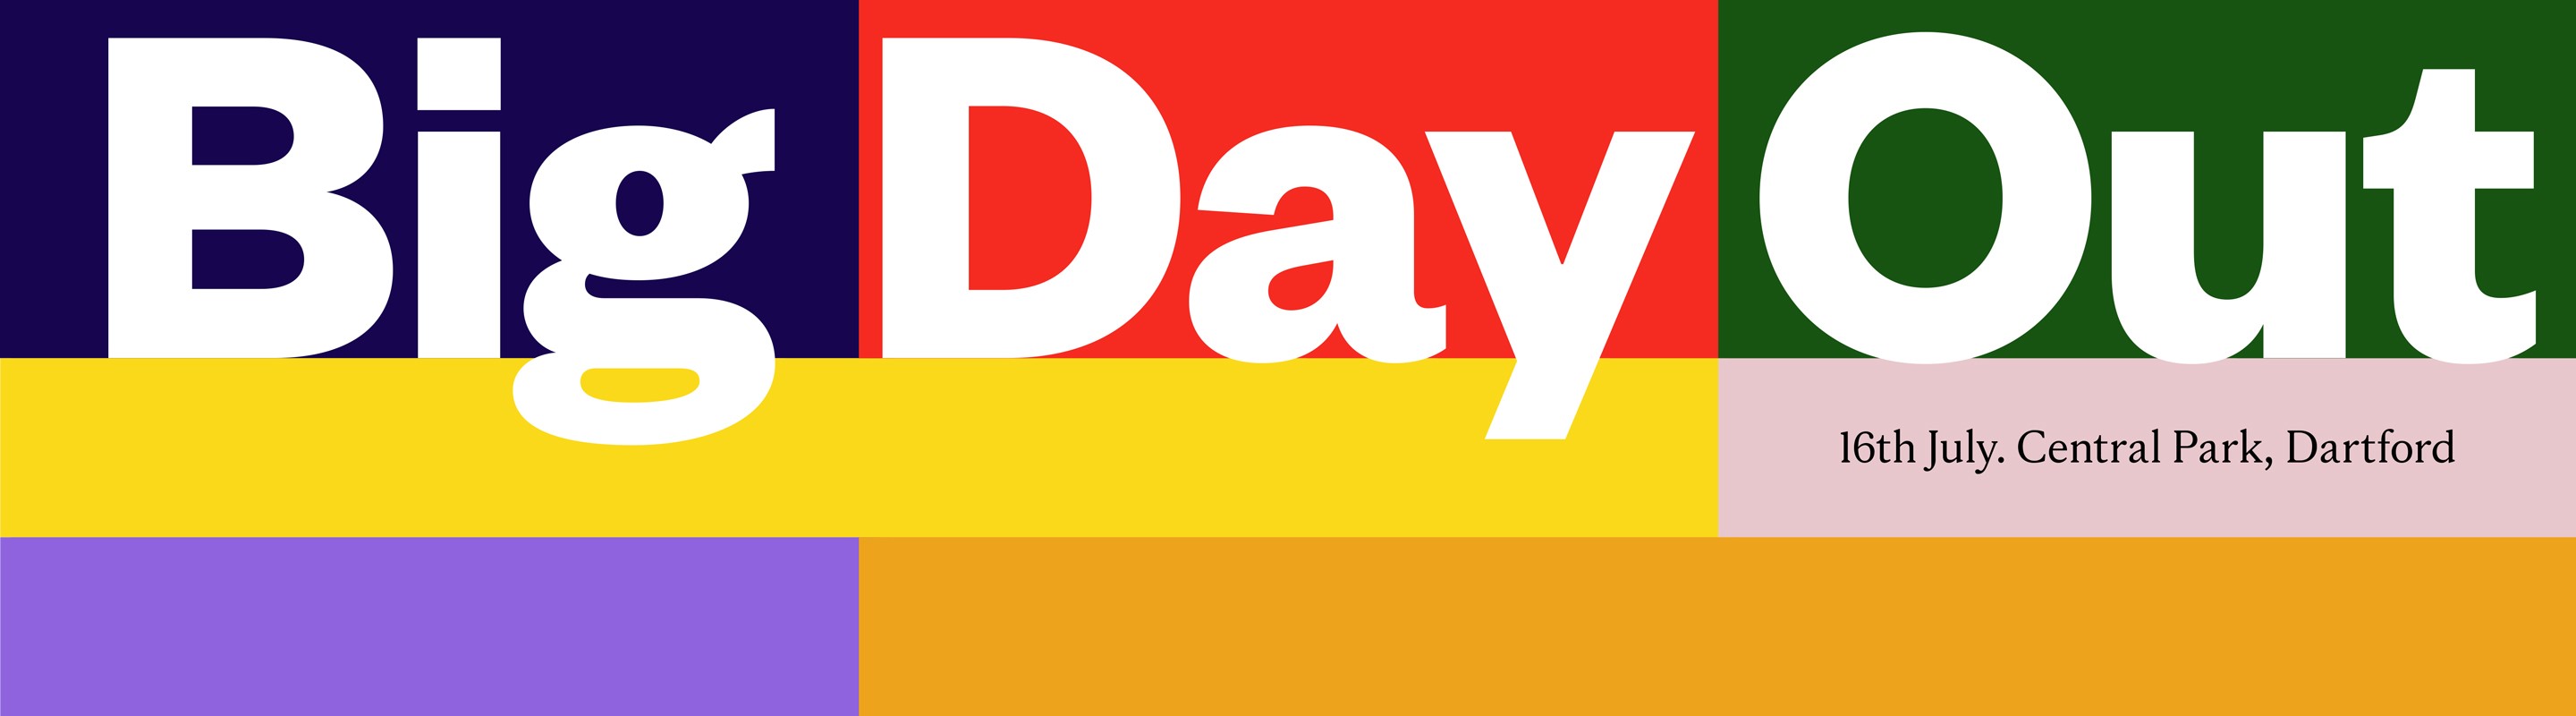 Big Day Out website banner